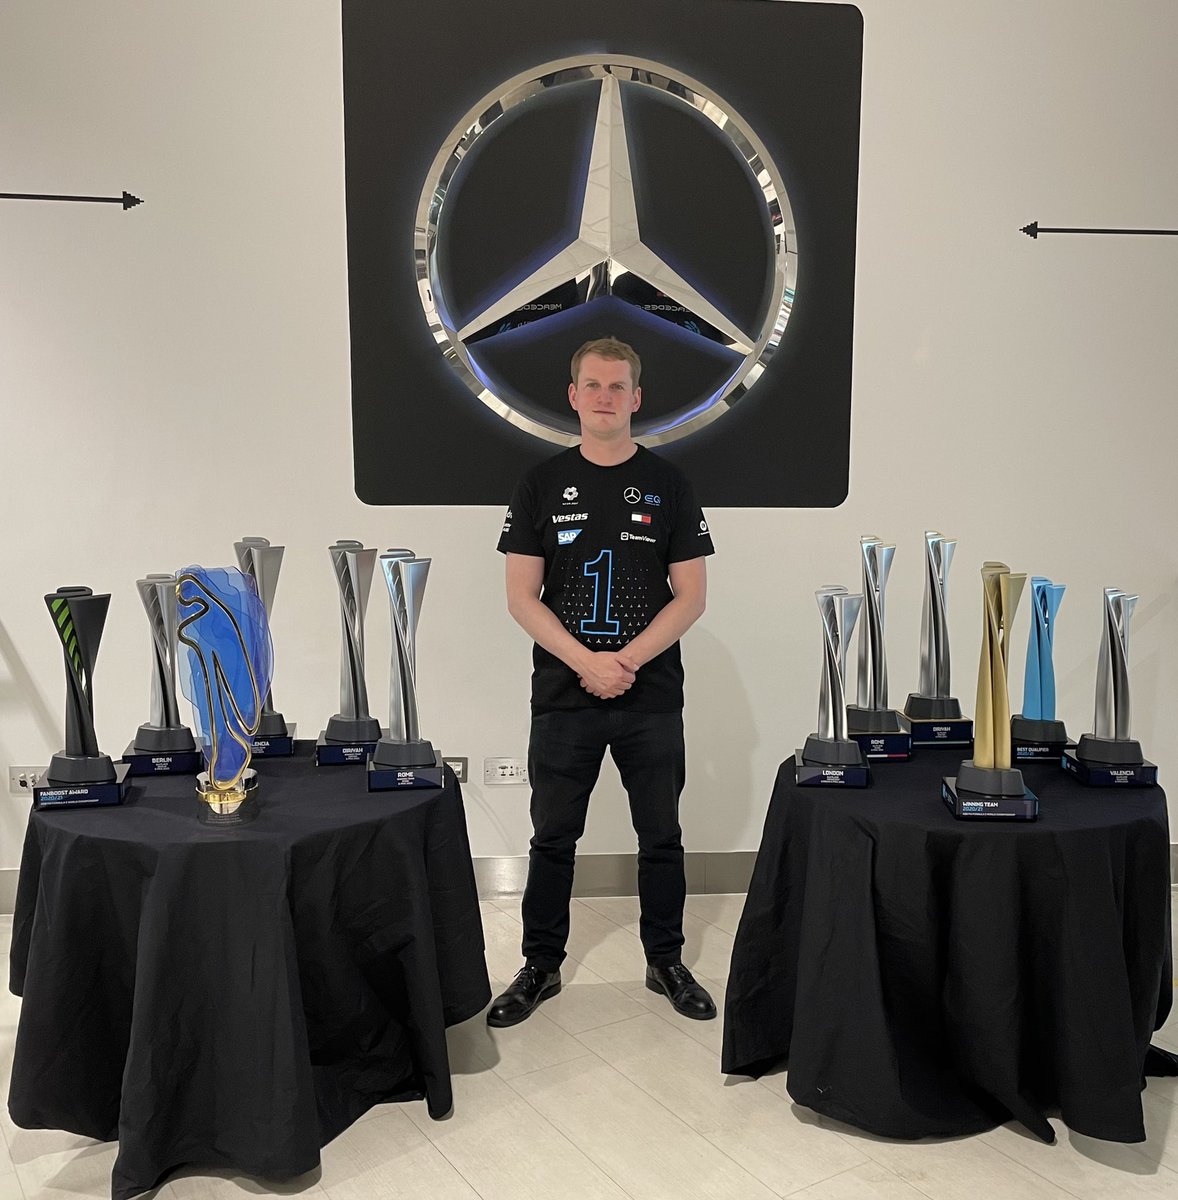 Great to have the @MercedesEQFE trophies at HPP today. Also great to see @svandoorne again, and meet @nyckdevries for the first time (crazy considering).

#worldchampions #WeDriveTheCity #drivenbyeq #HPPpower💪